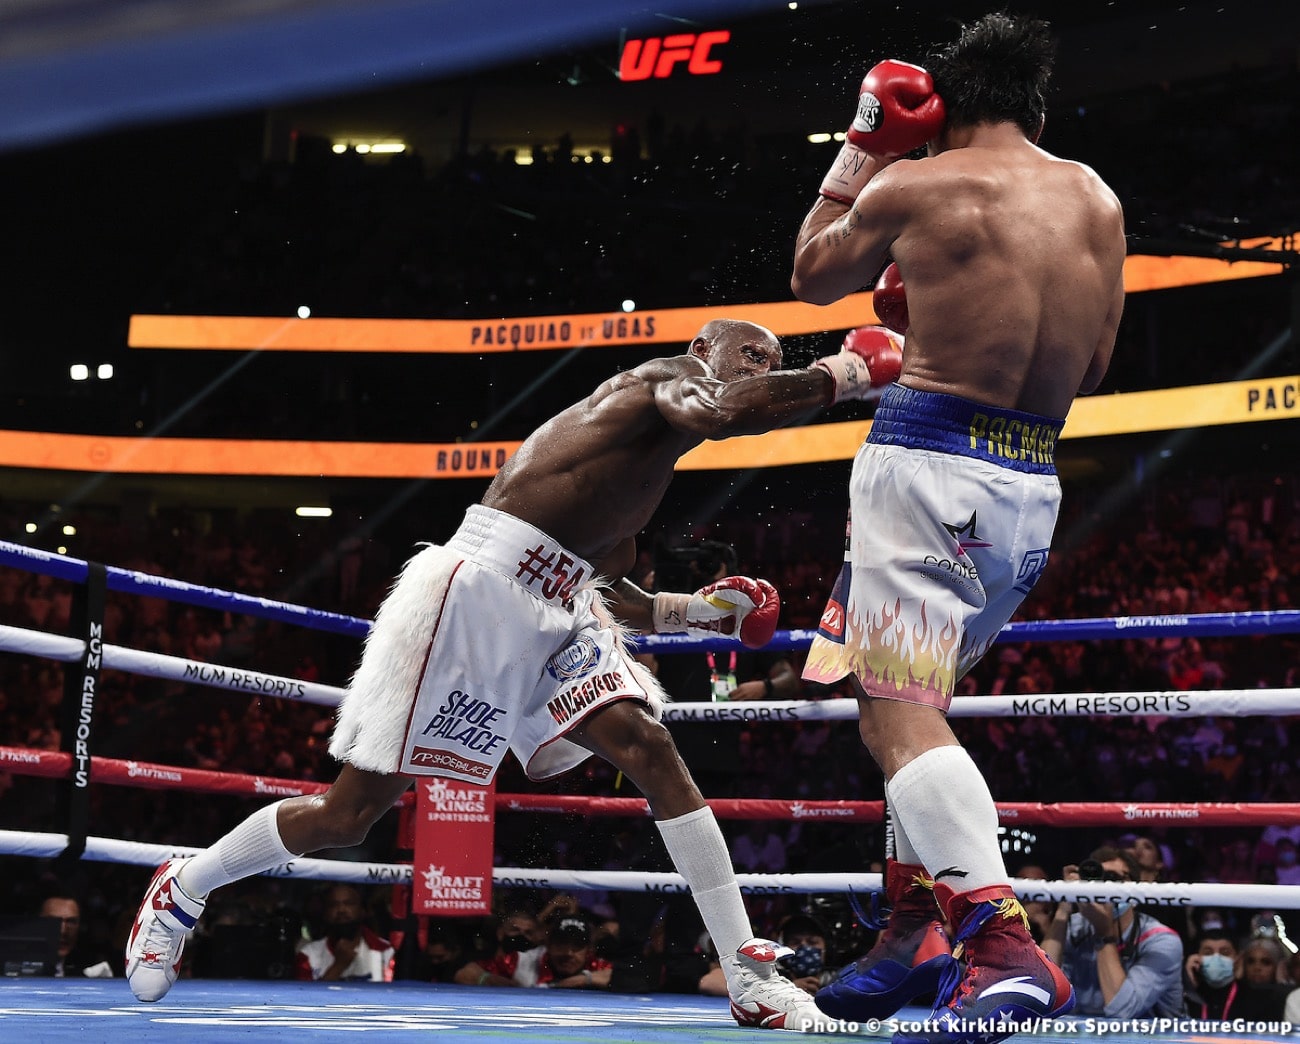 Full Fight Report: Yordenis Ugas Scores A Unanimous Decision Over Manny Pacquiao In An Entertaining Fight